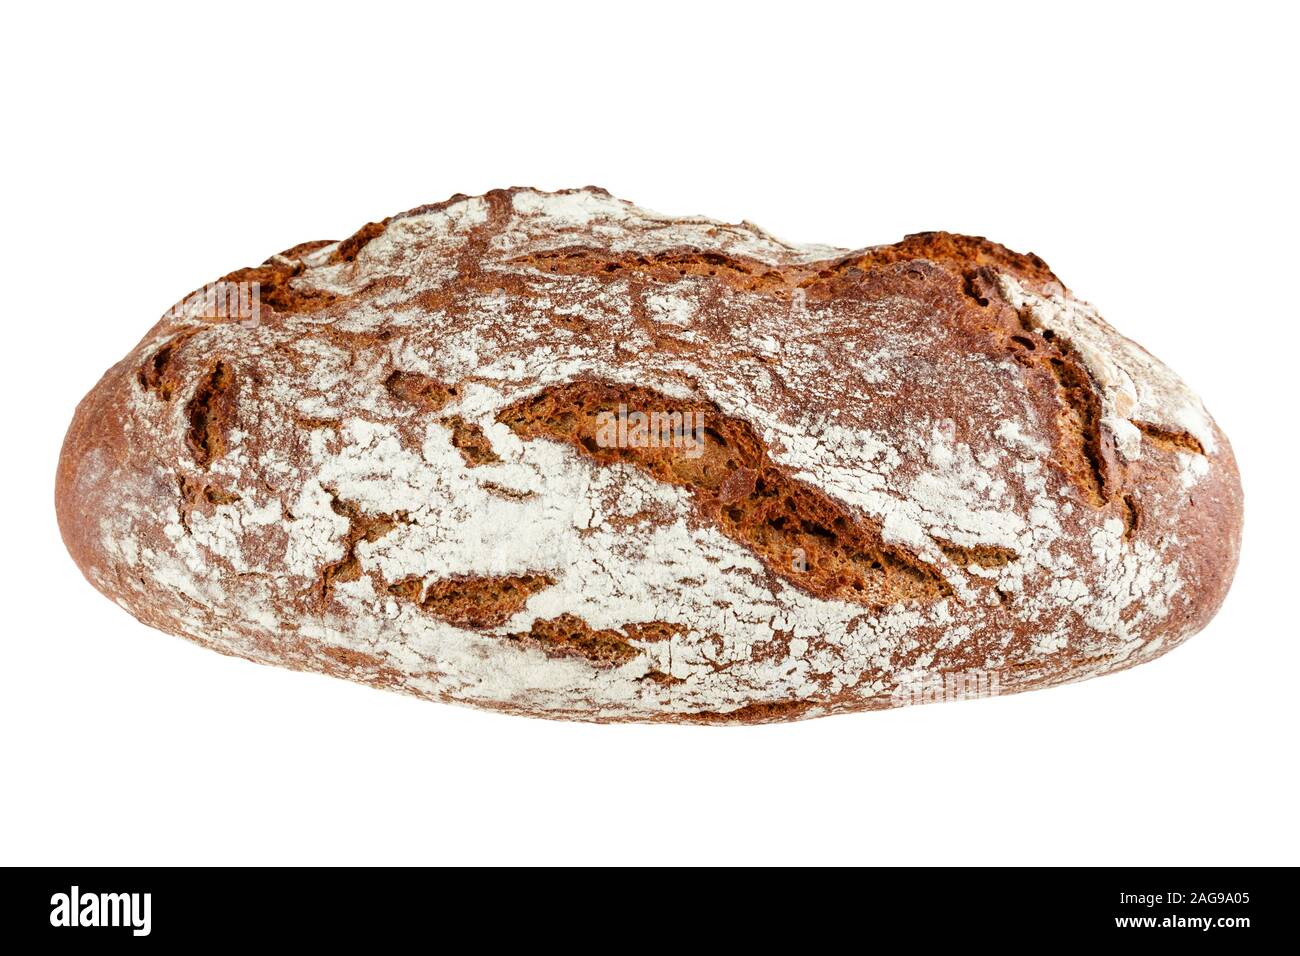 Closeup of rye bread isolated on white background Stock Photo